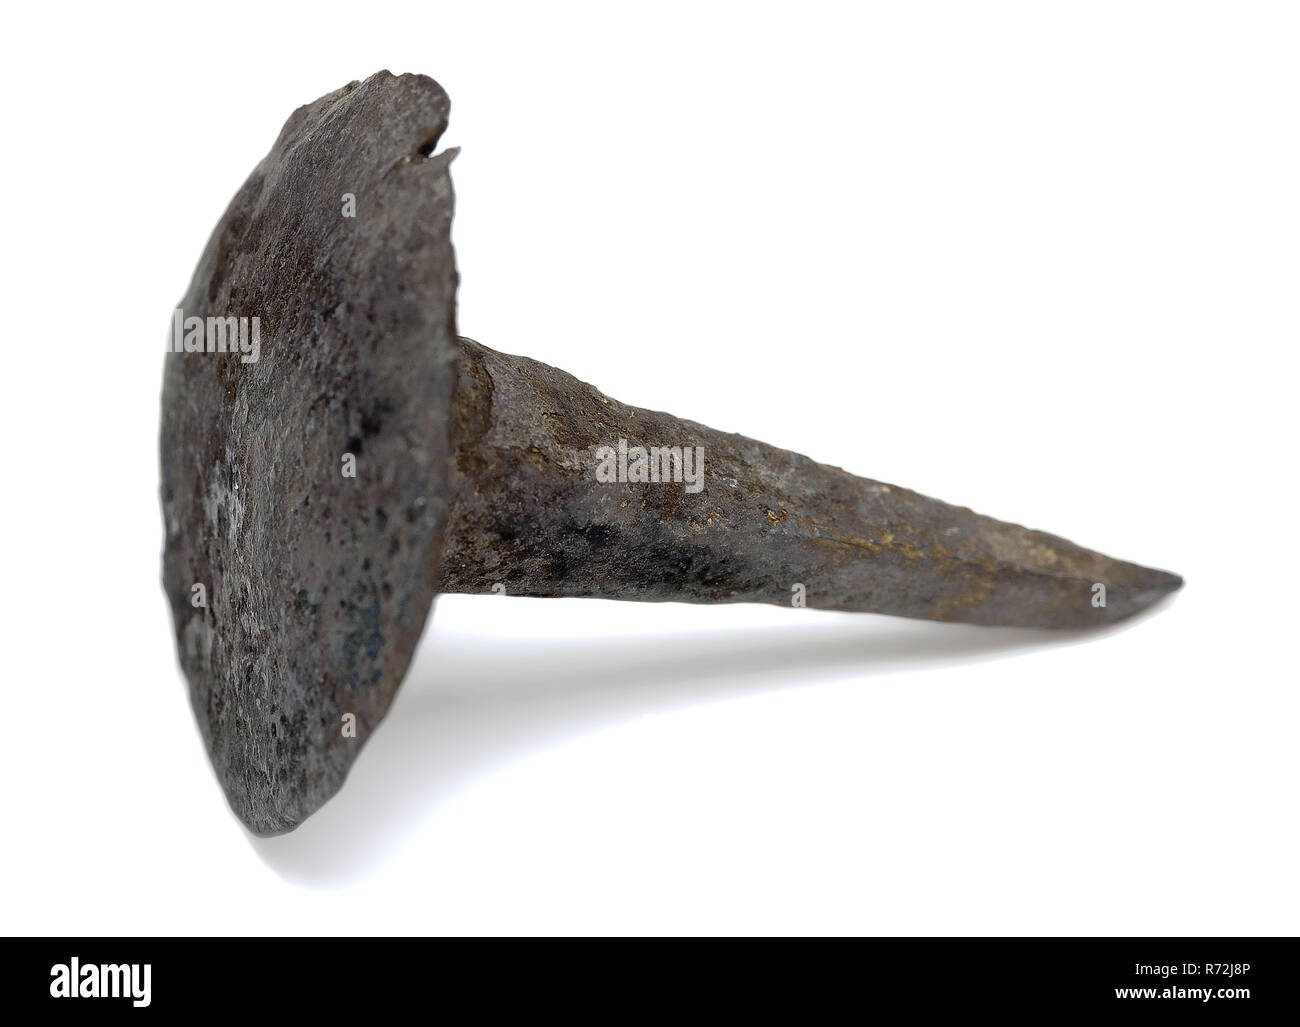 Two bronze forged nails or ornamental nails, nail fitting fittings fastener  soil find bronze metal no.1), head, cast forged Two nails with large round  head one head is convex other flat. Tacks